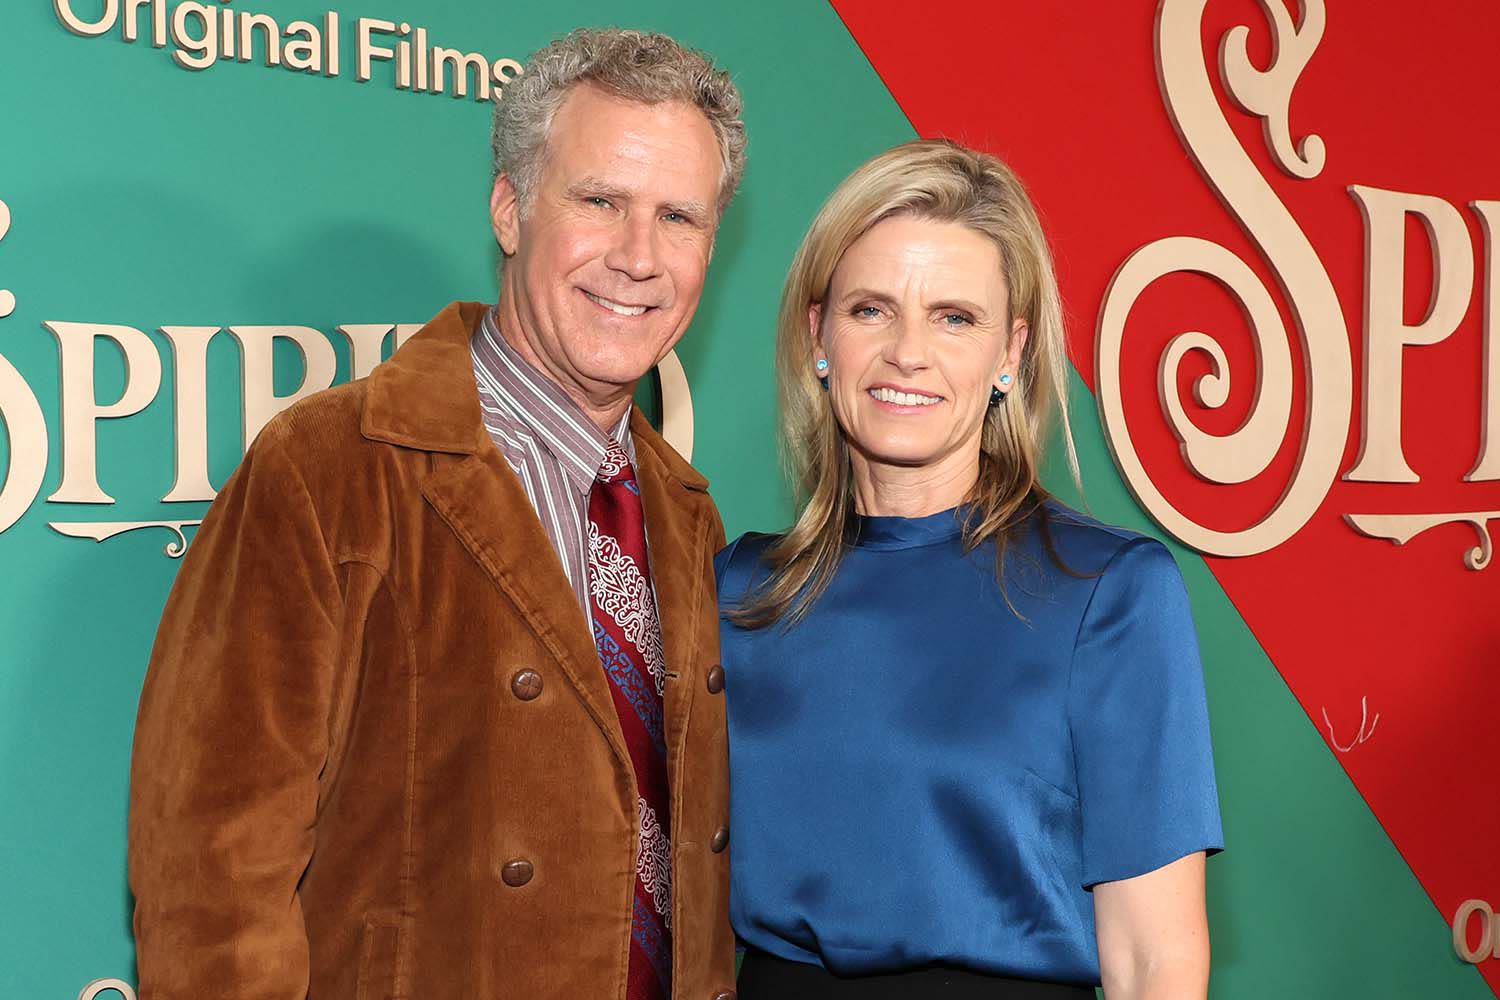 Will Ferrell and Wife Viveca Paulin Had Early Breakup When It Was ‘Too Much Too Fast’ After They Met